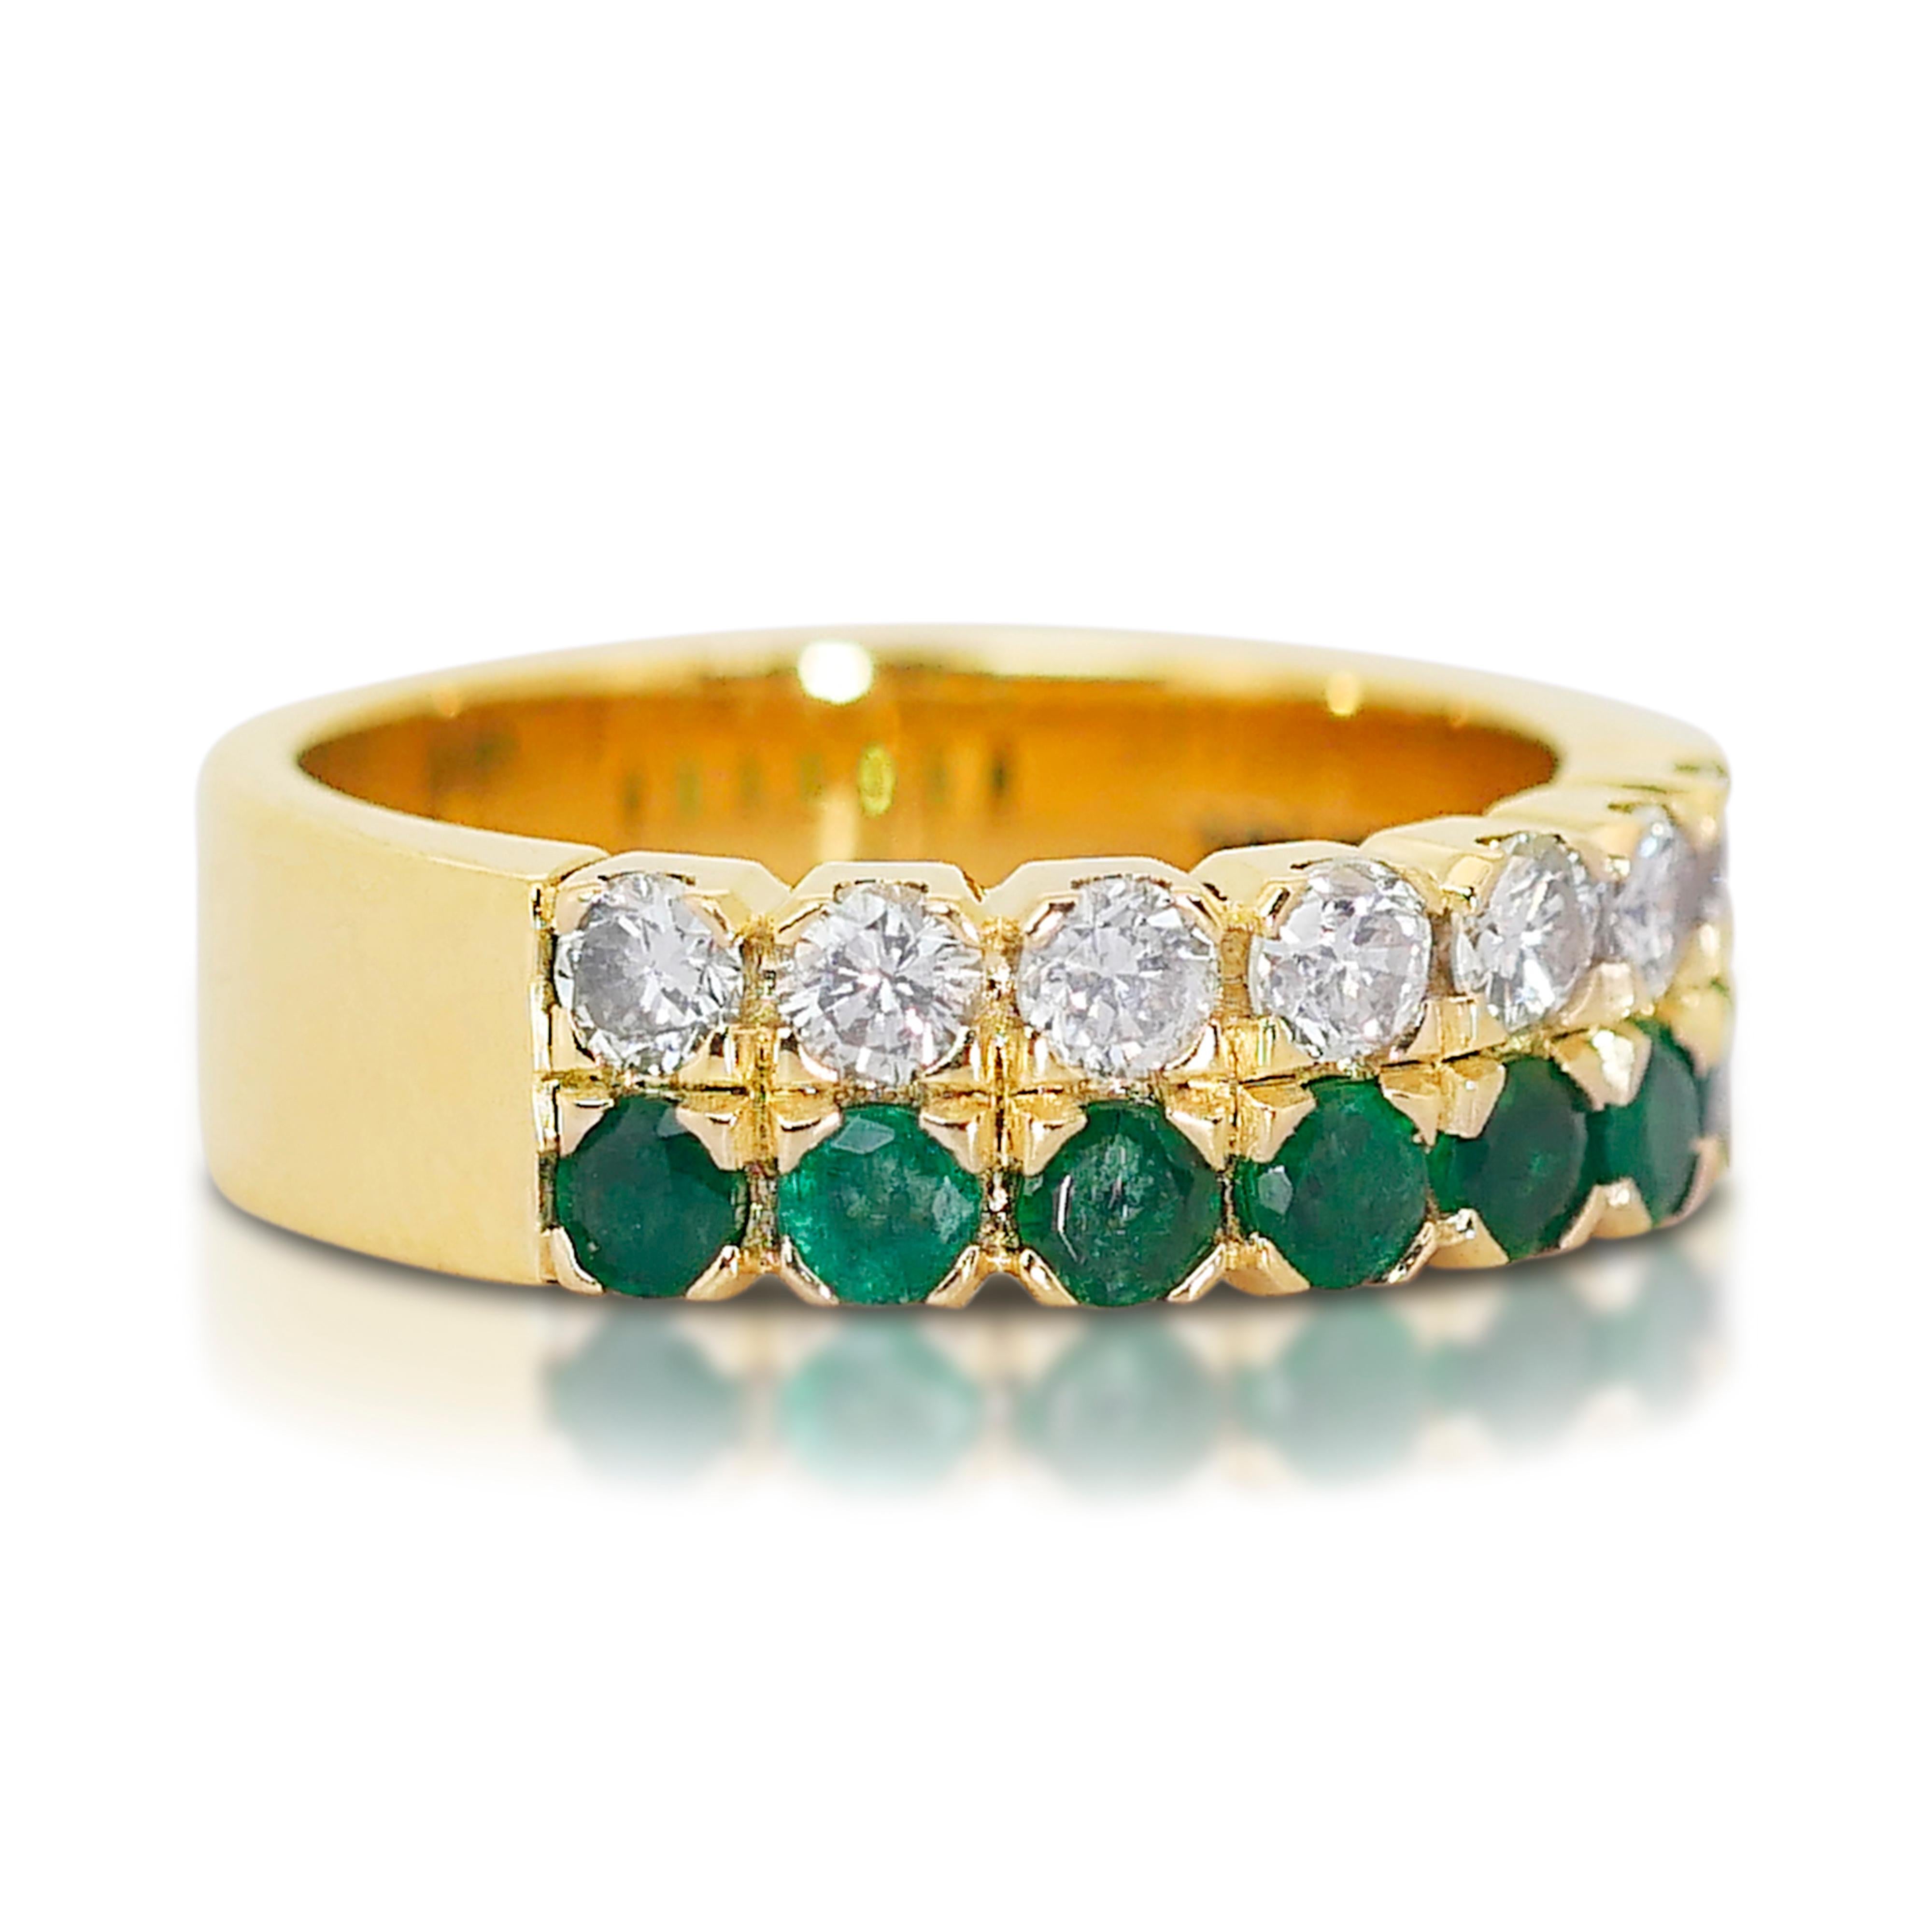 1.45 carat of Emerald Natural Gem and natural Diamonds 
Elevate your style with this fascinating emerald ring. This dazzling piece is a collection of seven Round Mixed-Cut Emeralds carefully selected for its lush green hue and sparkling